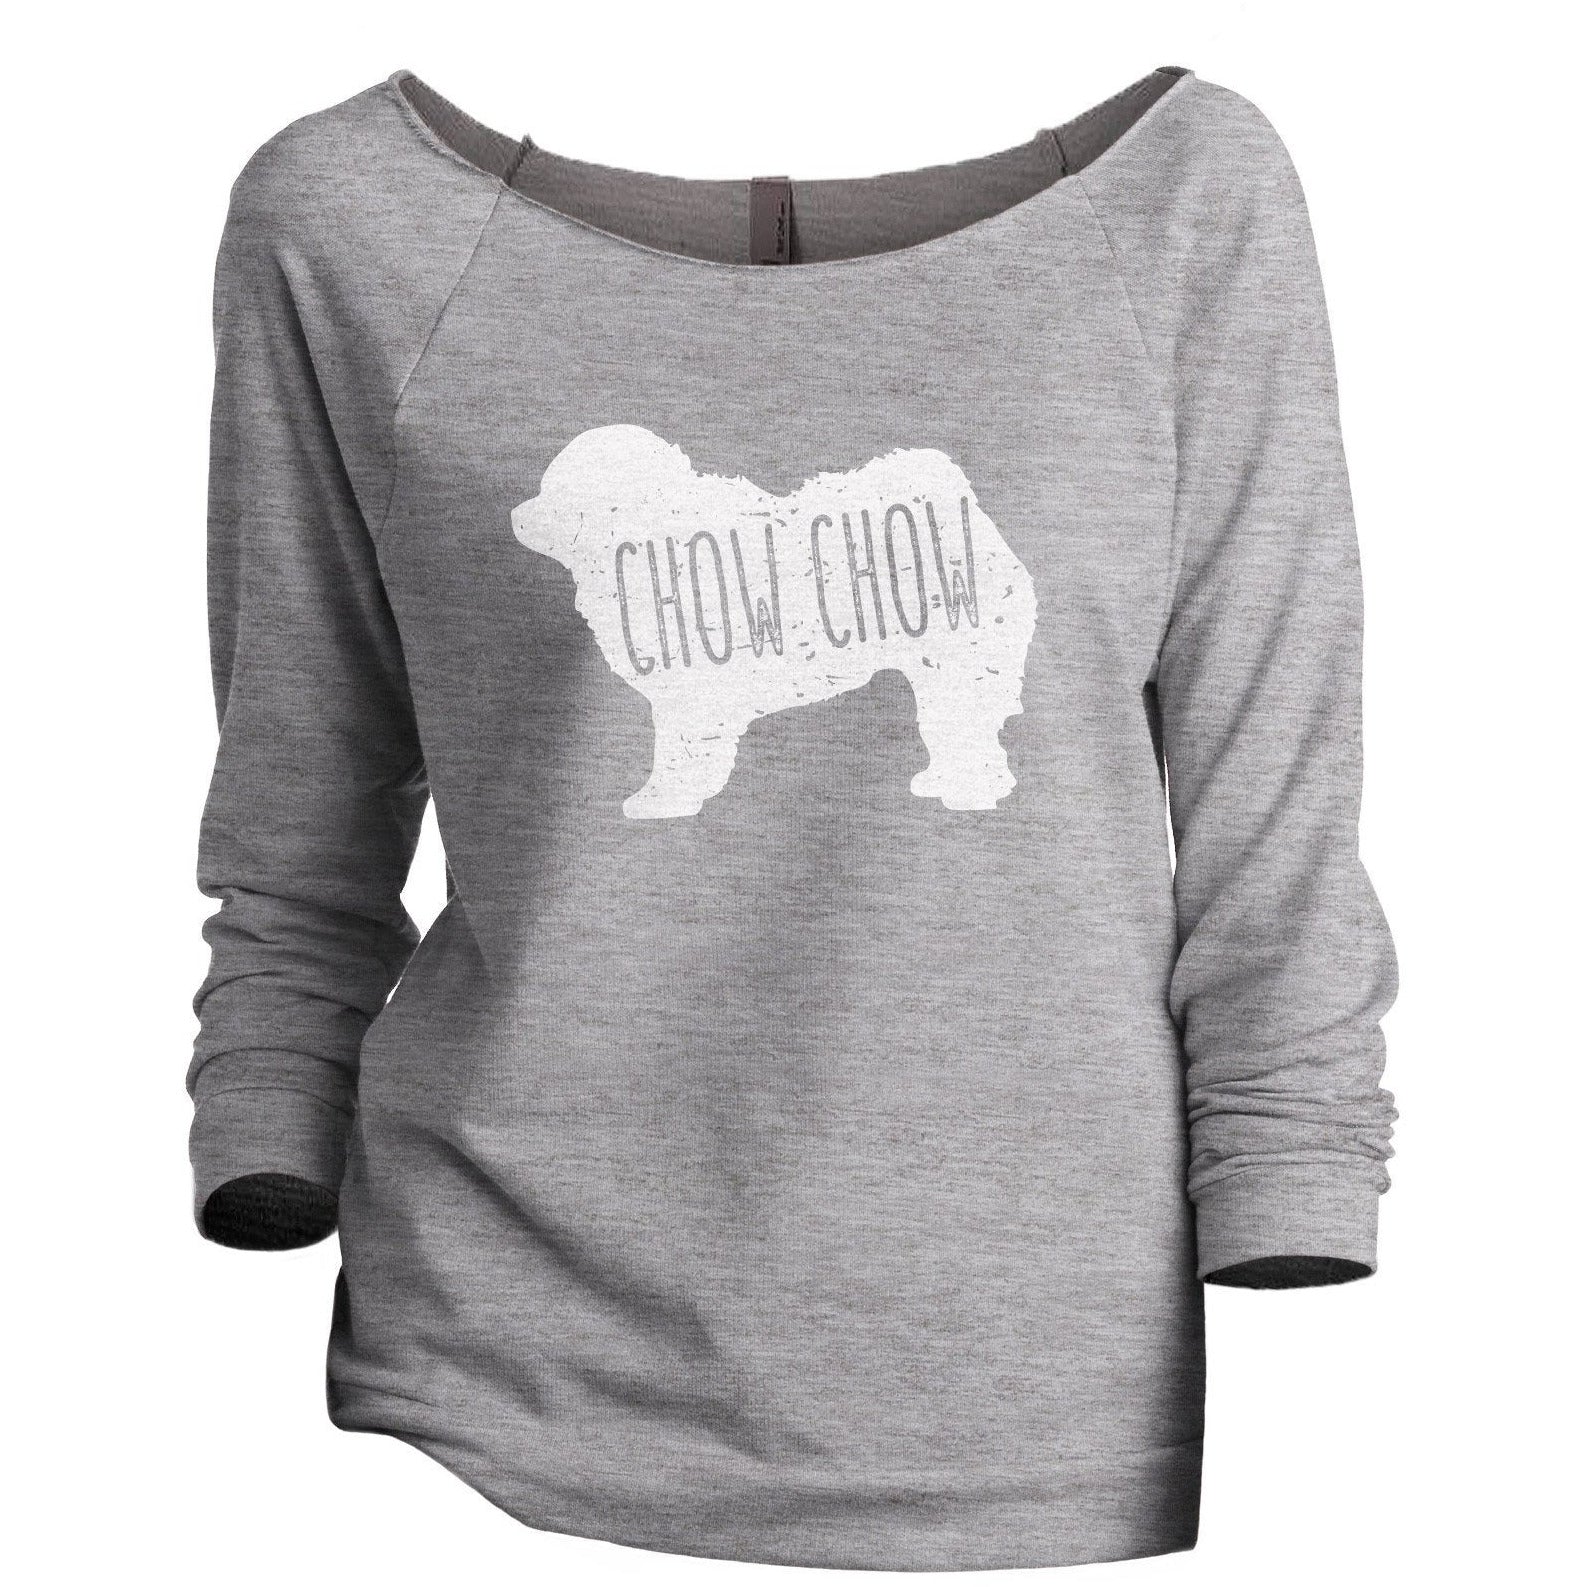 Chow Chow Dog Silhouette Women's Graphic Printed Lightweight Slouchy 3/4 Sleeves Sweatshirt Sport Grey